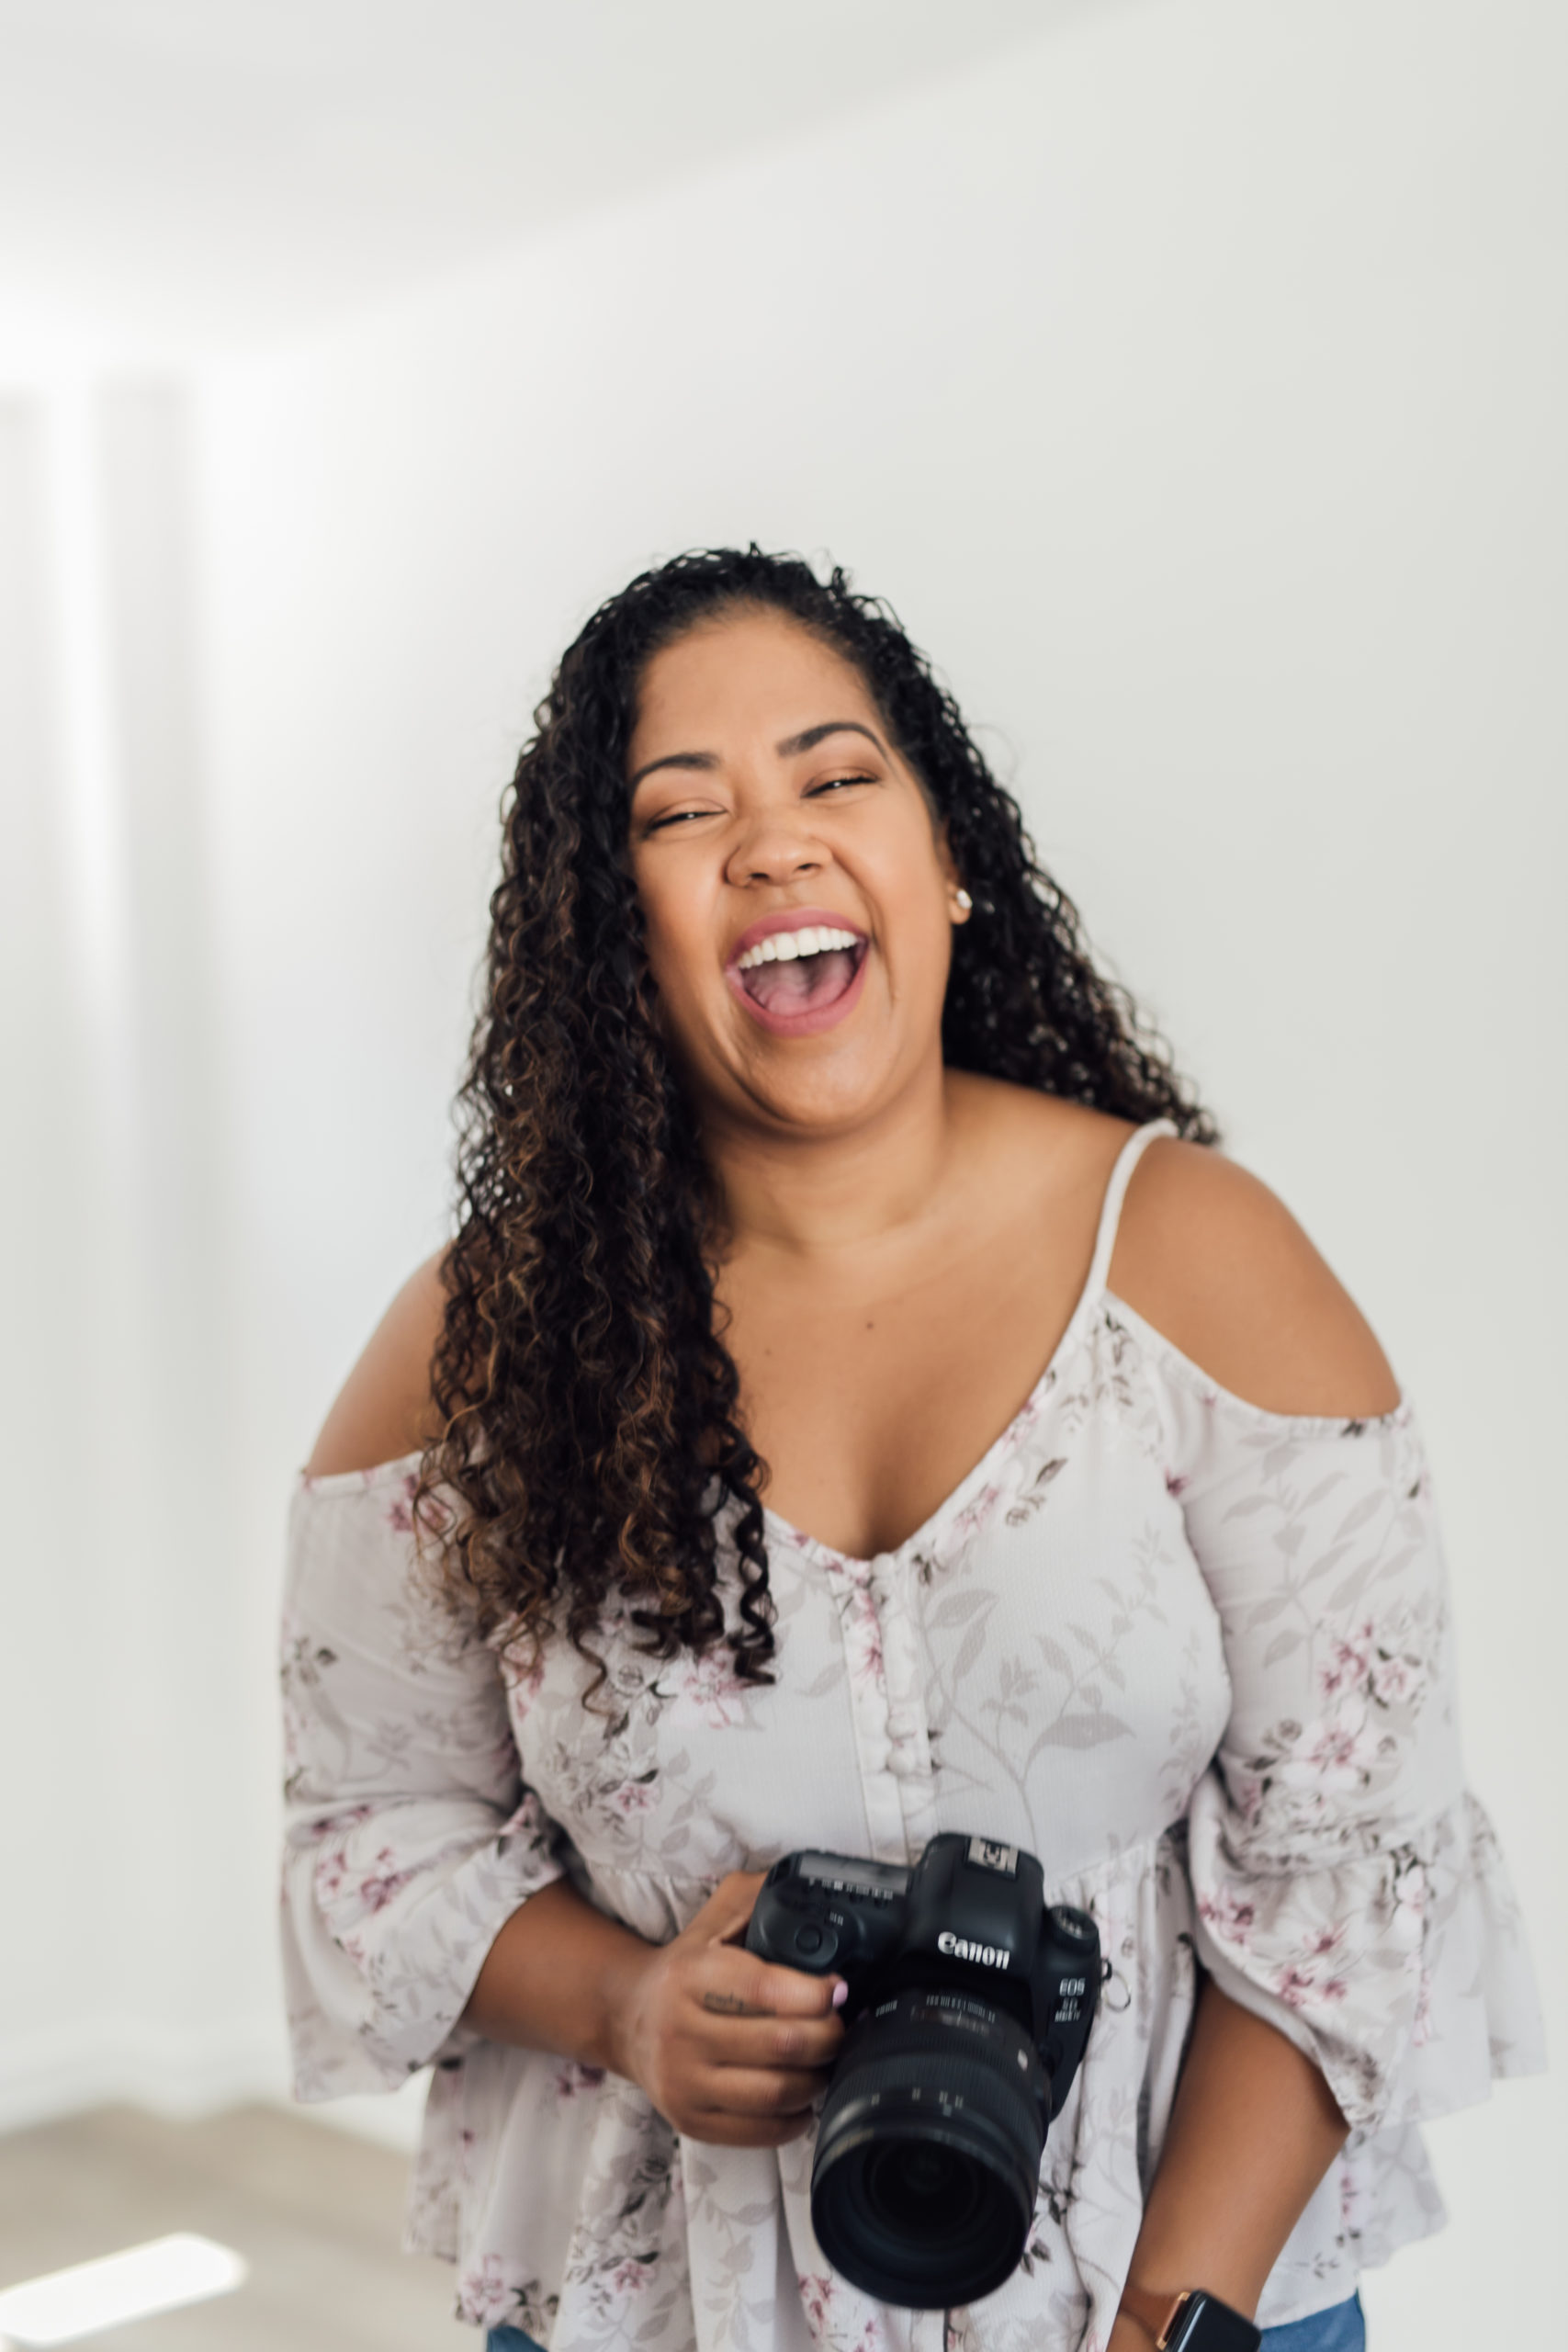 A joyful wedding photographer with curly hair holding a camera, laughing and wearing a floral print top in a bright white room.